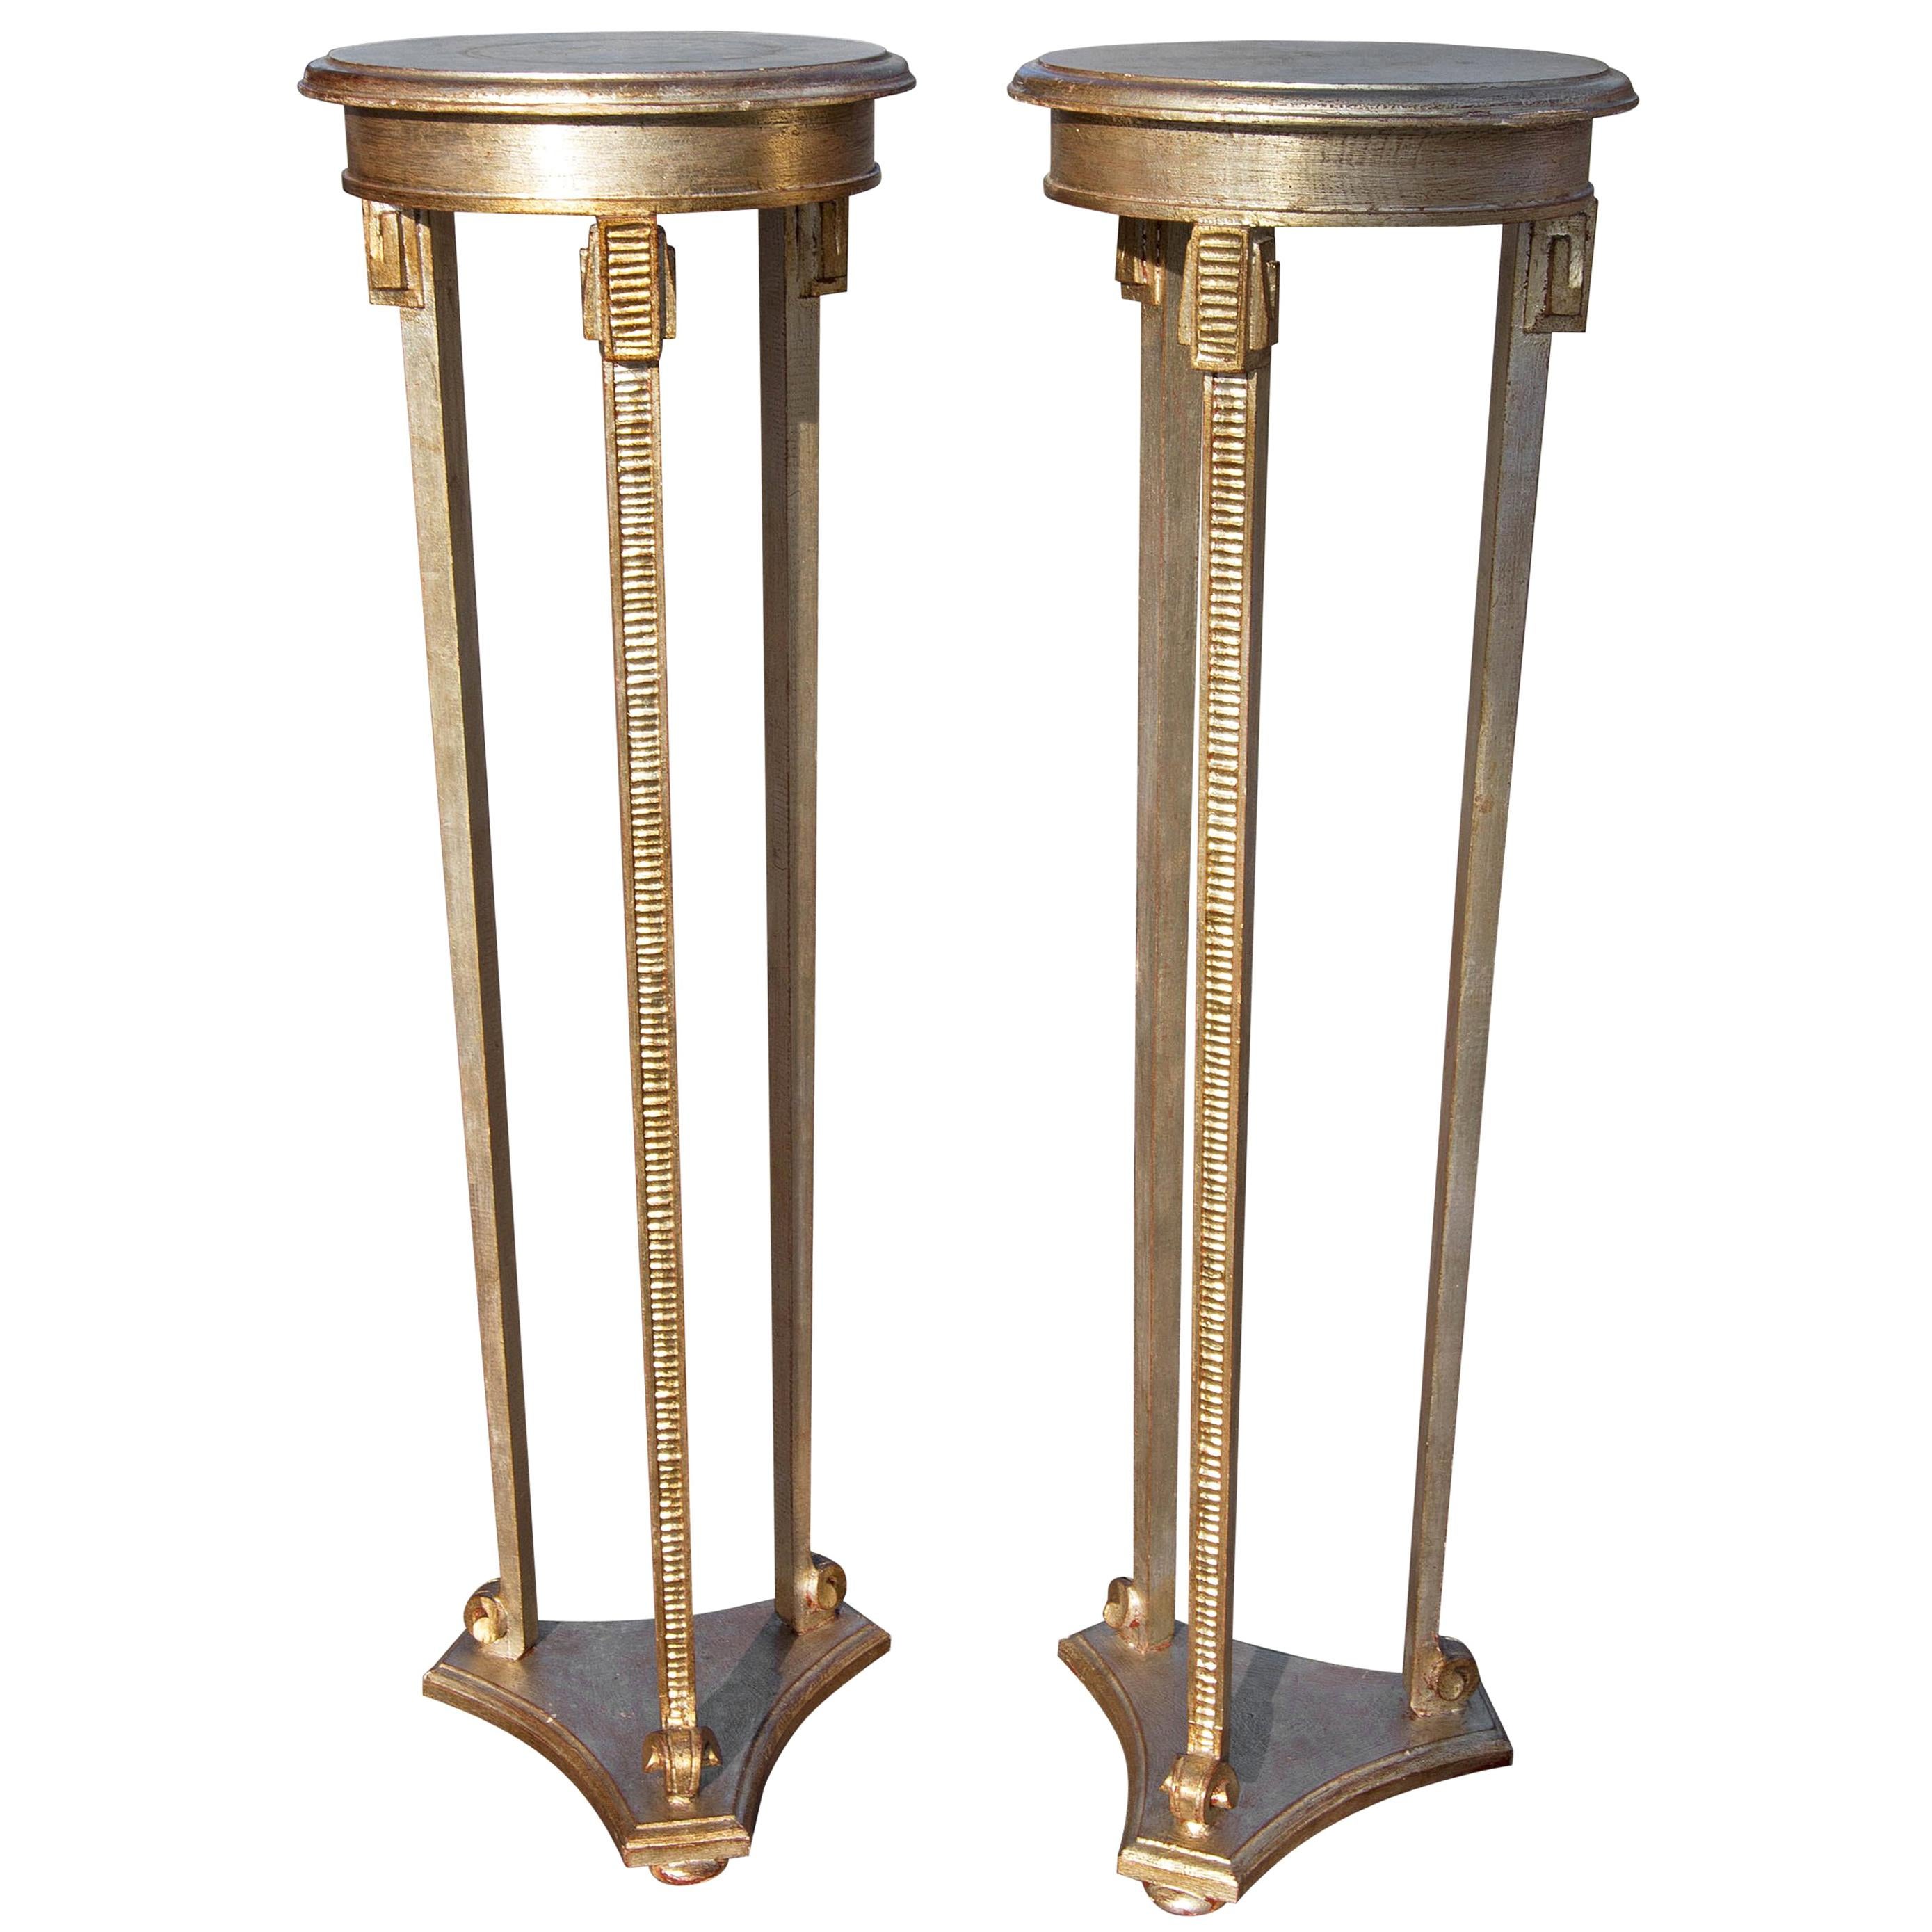 Pair of Italian Gilt Neoclassical Torchère Stands Mid-Century Modern